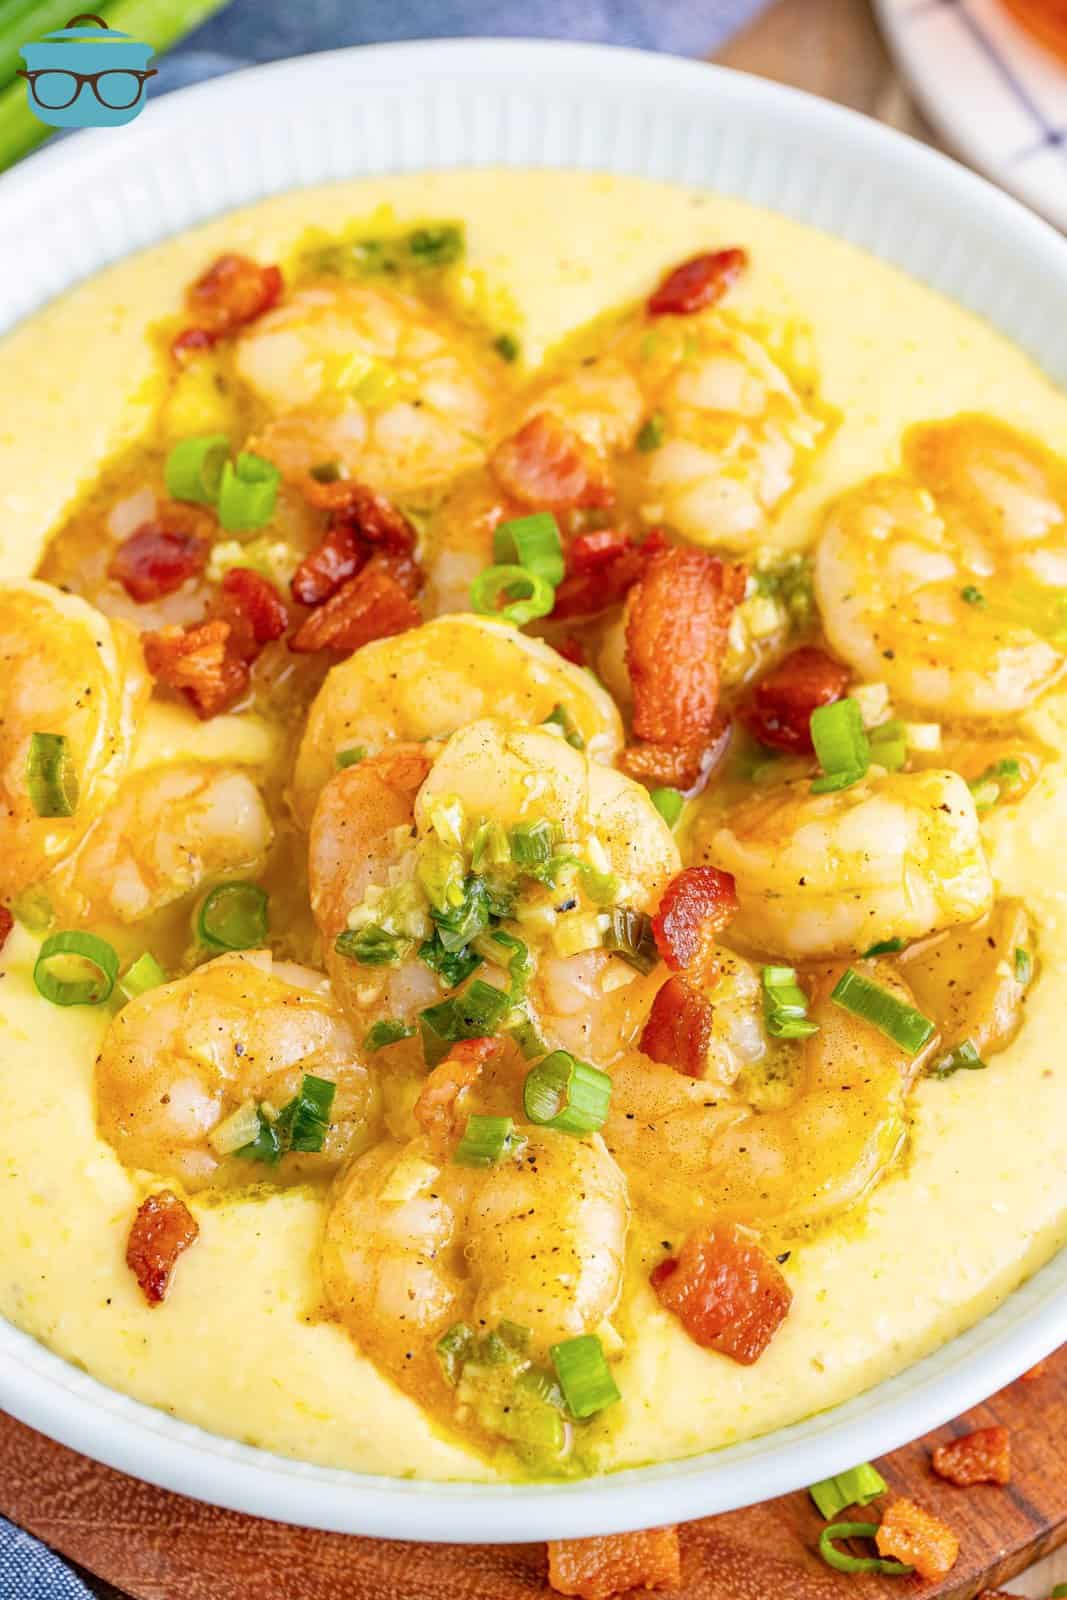 Looking down on a serving bowl of shrimp and grits with garnishes.